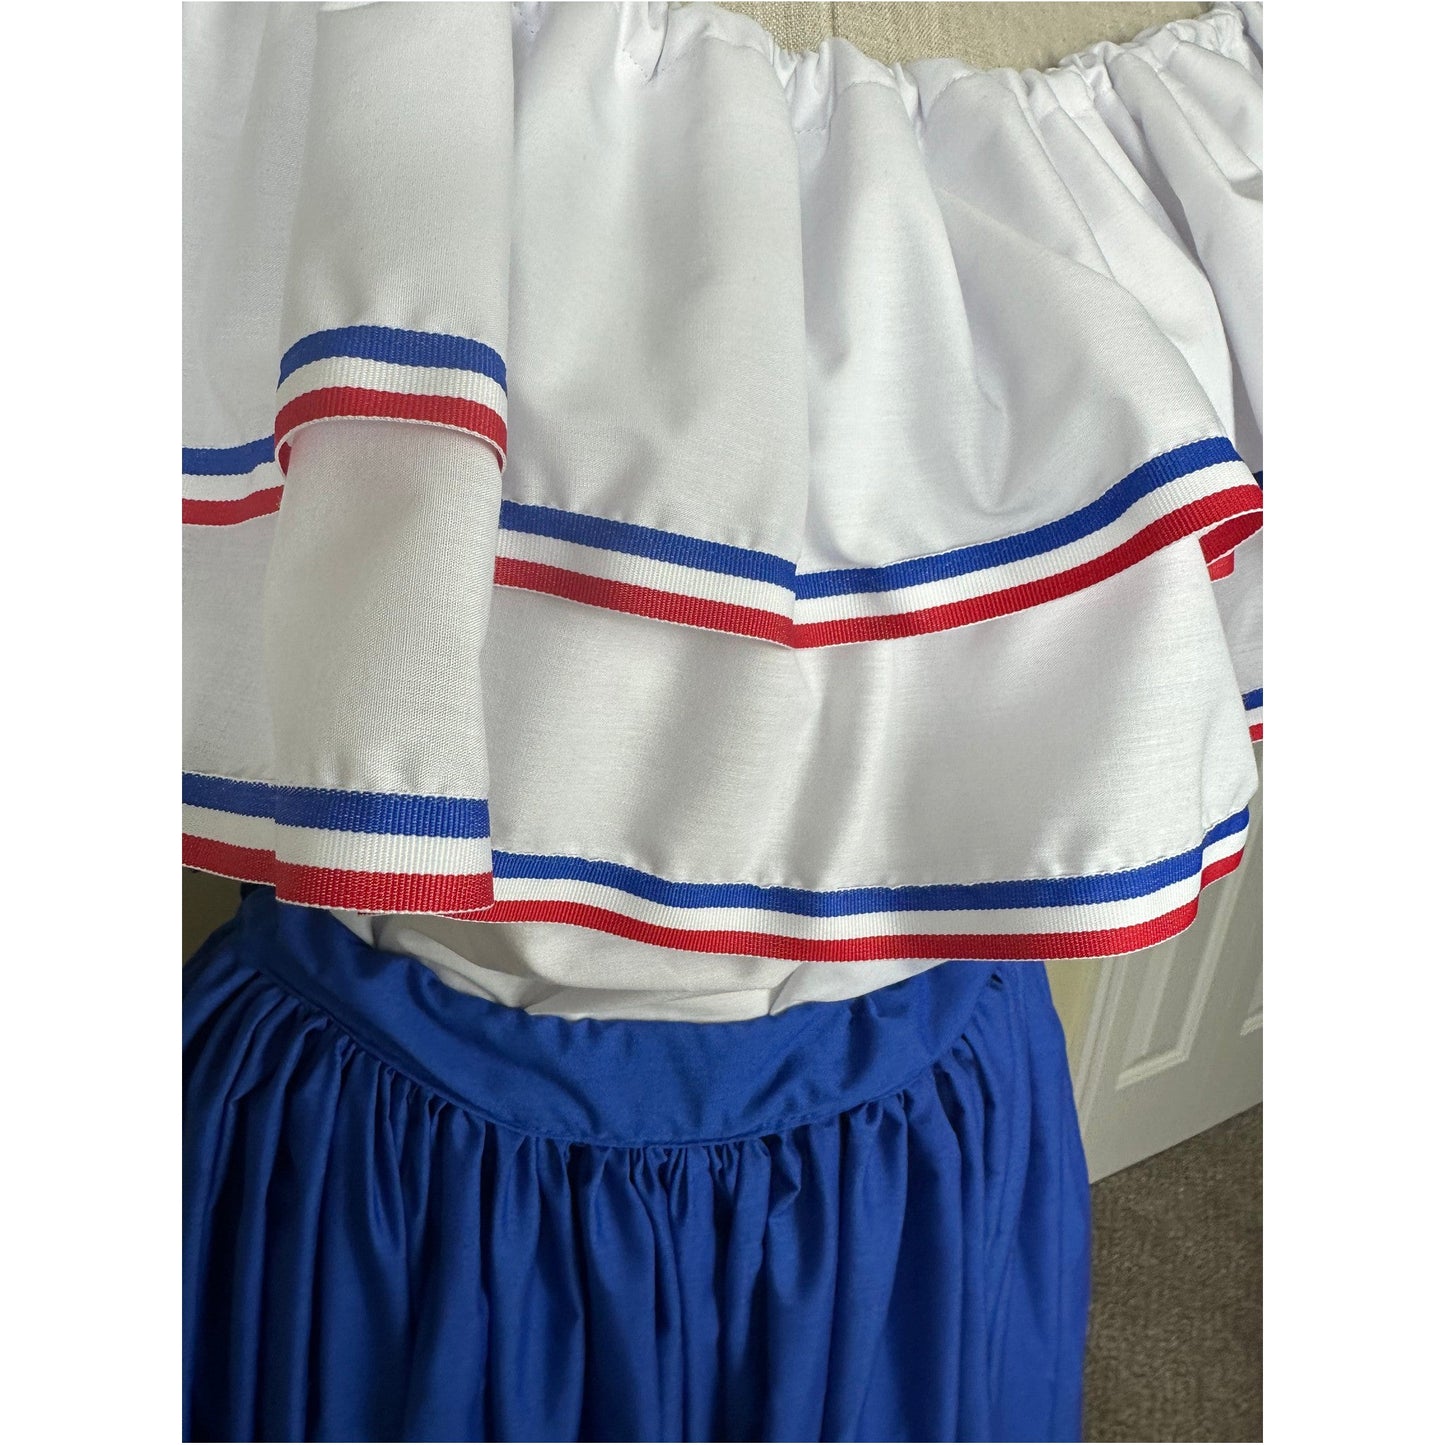 Dominican Republic Traditional Dress - Wide